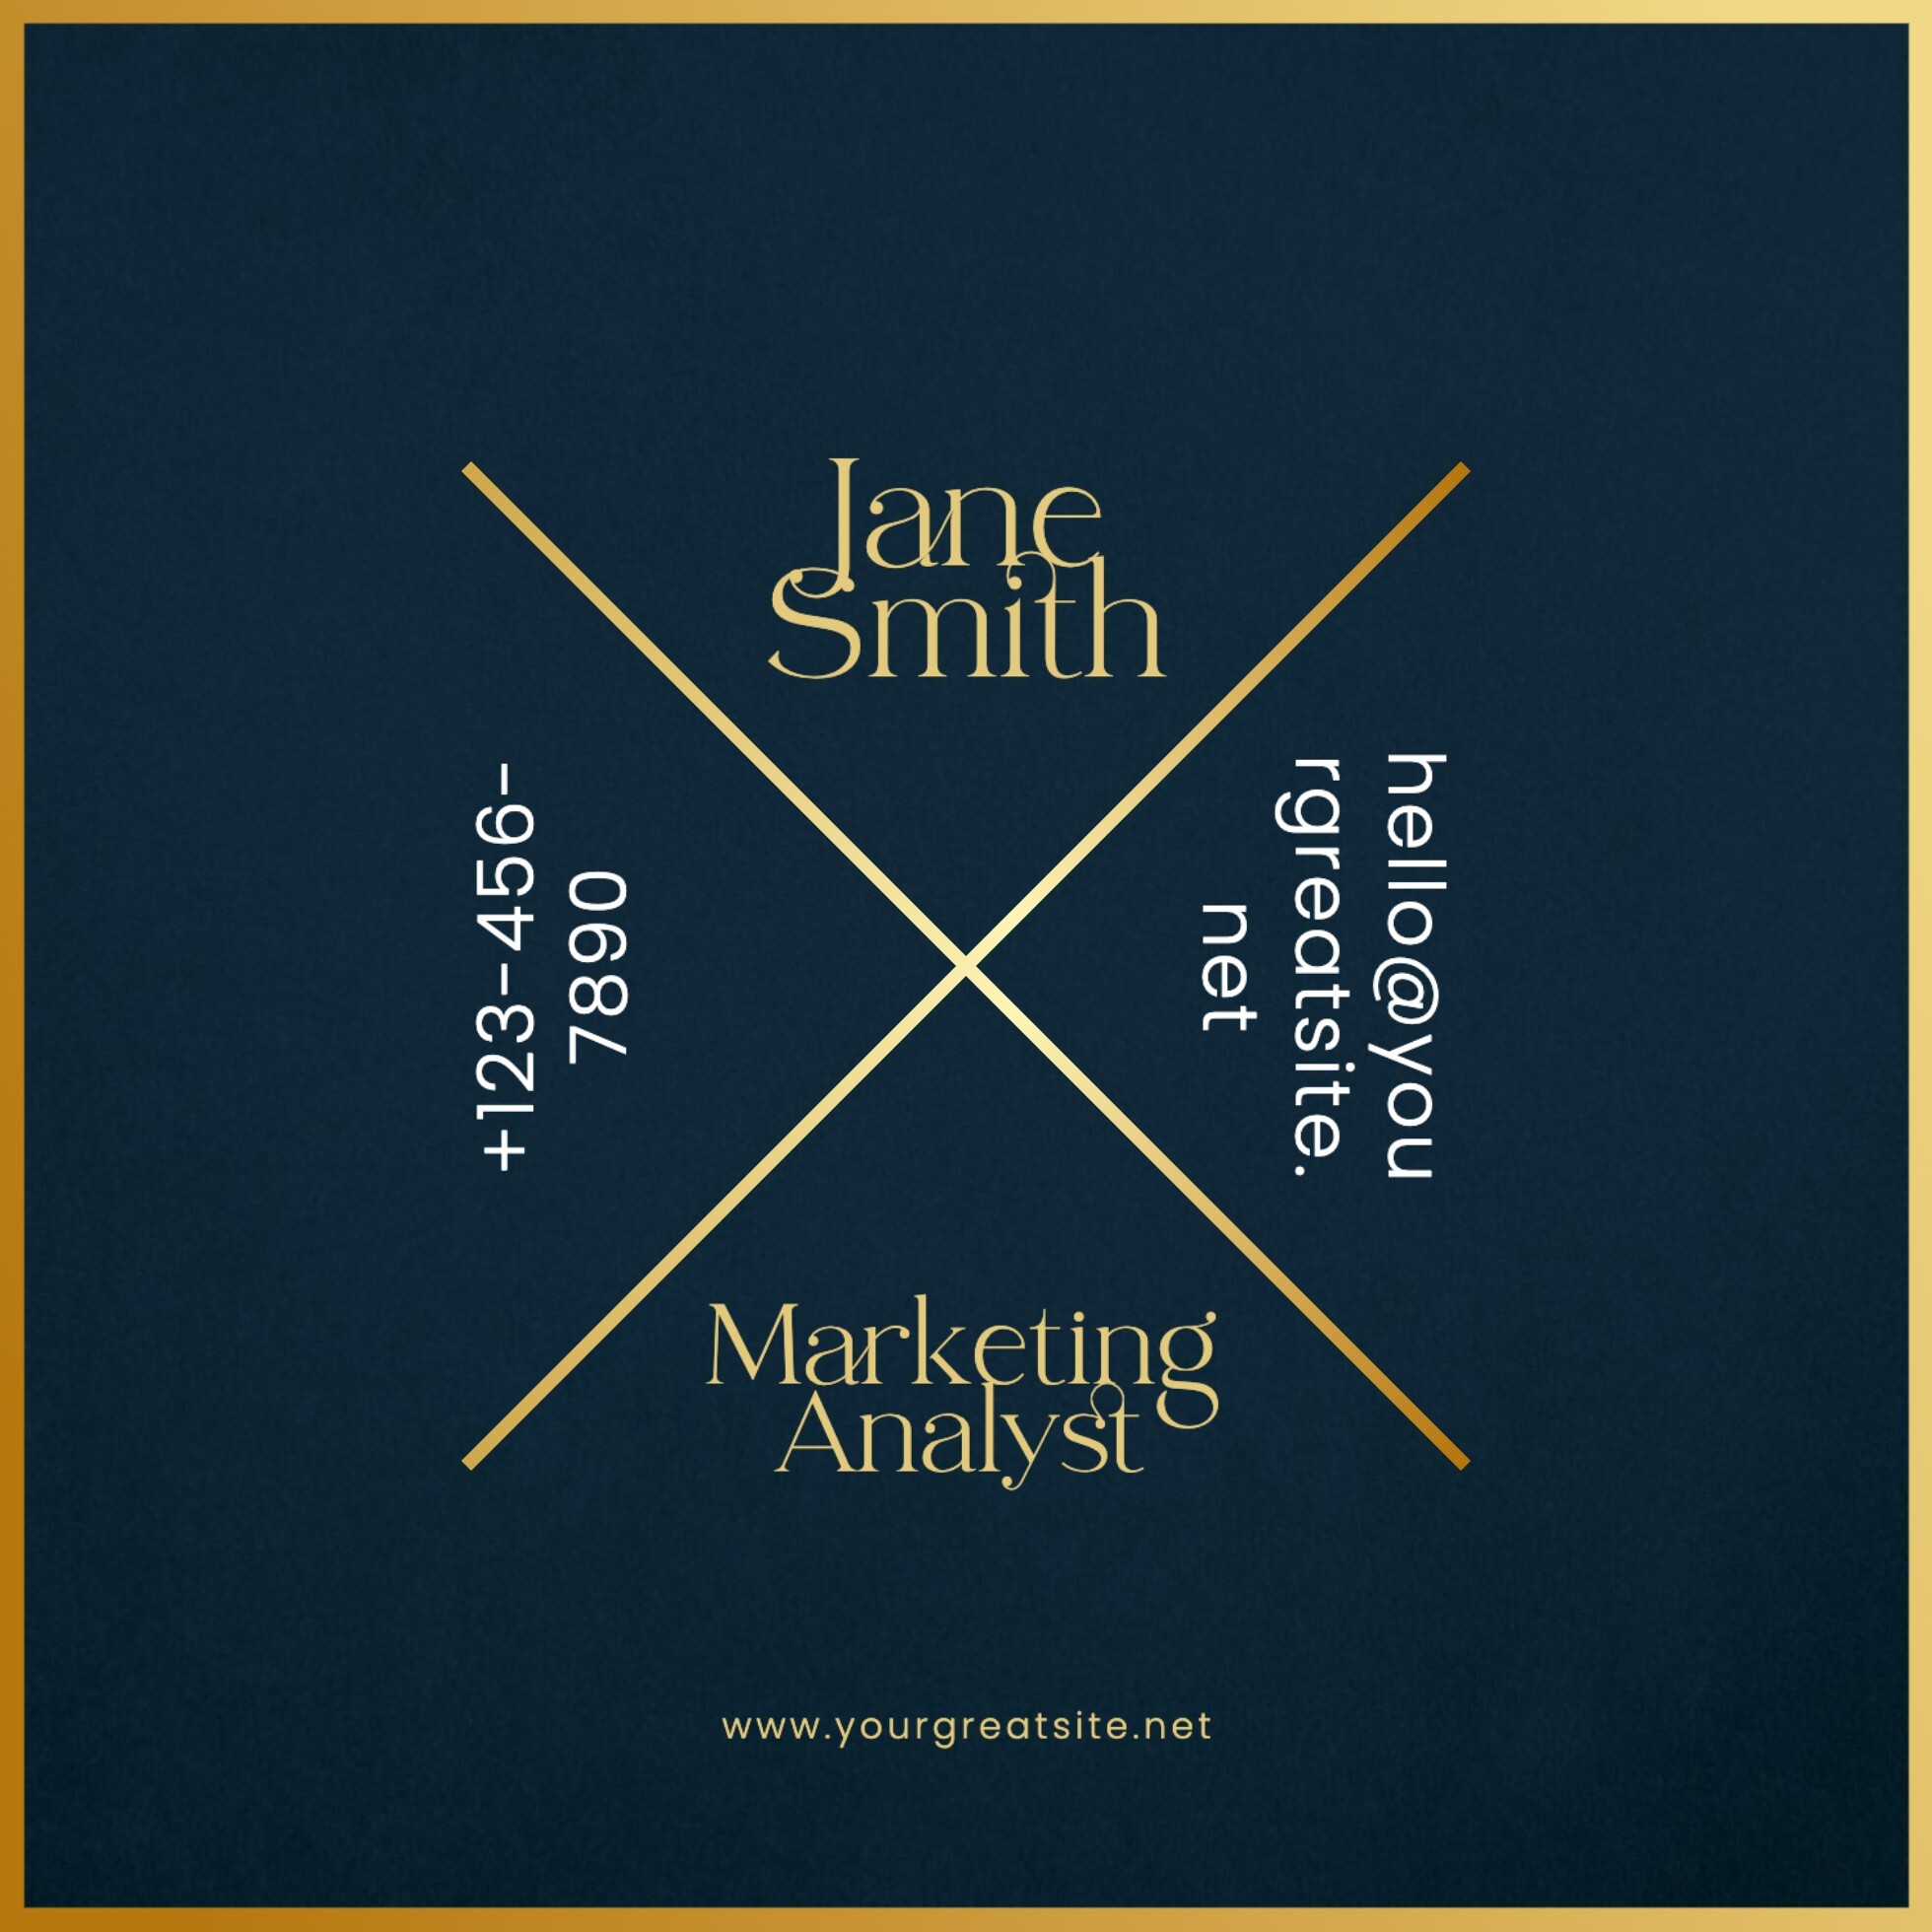 Minimalist Marketing Analyst Card Template for Business